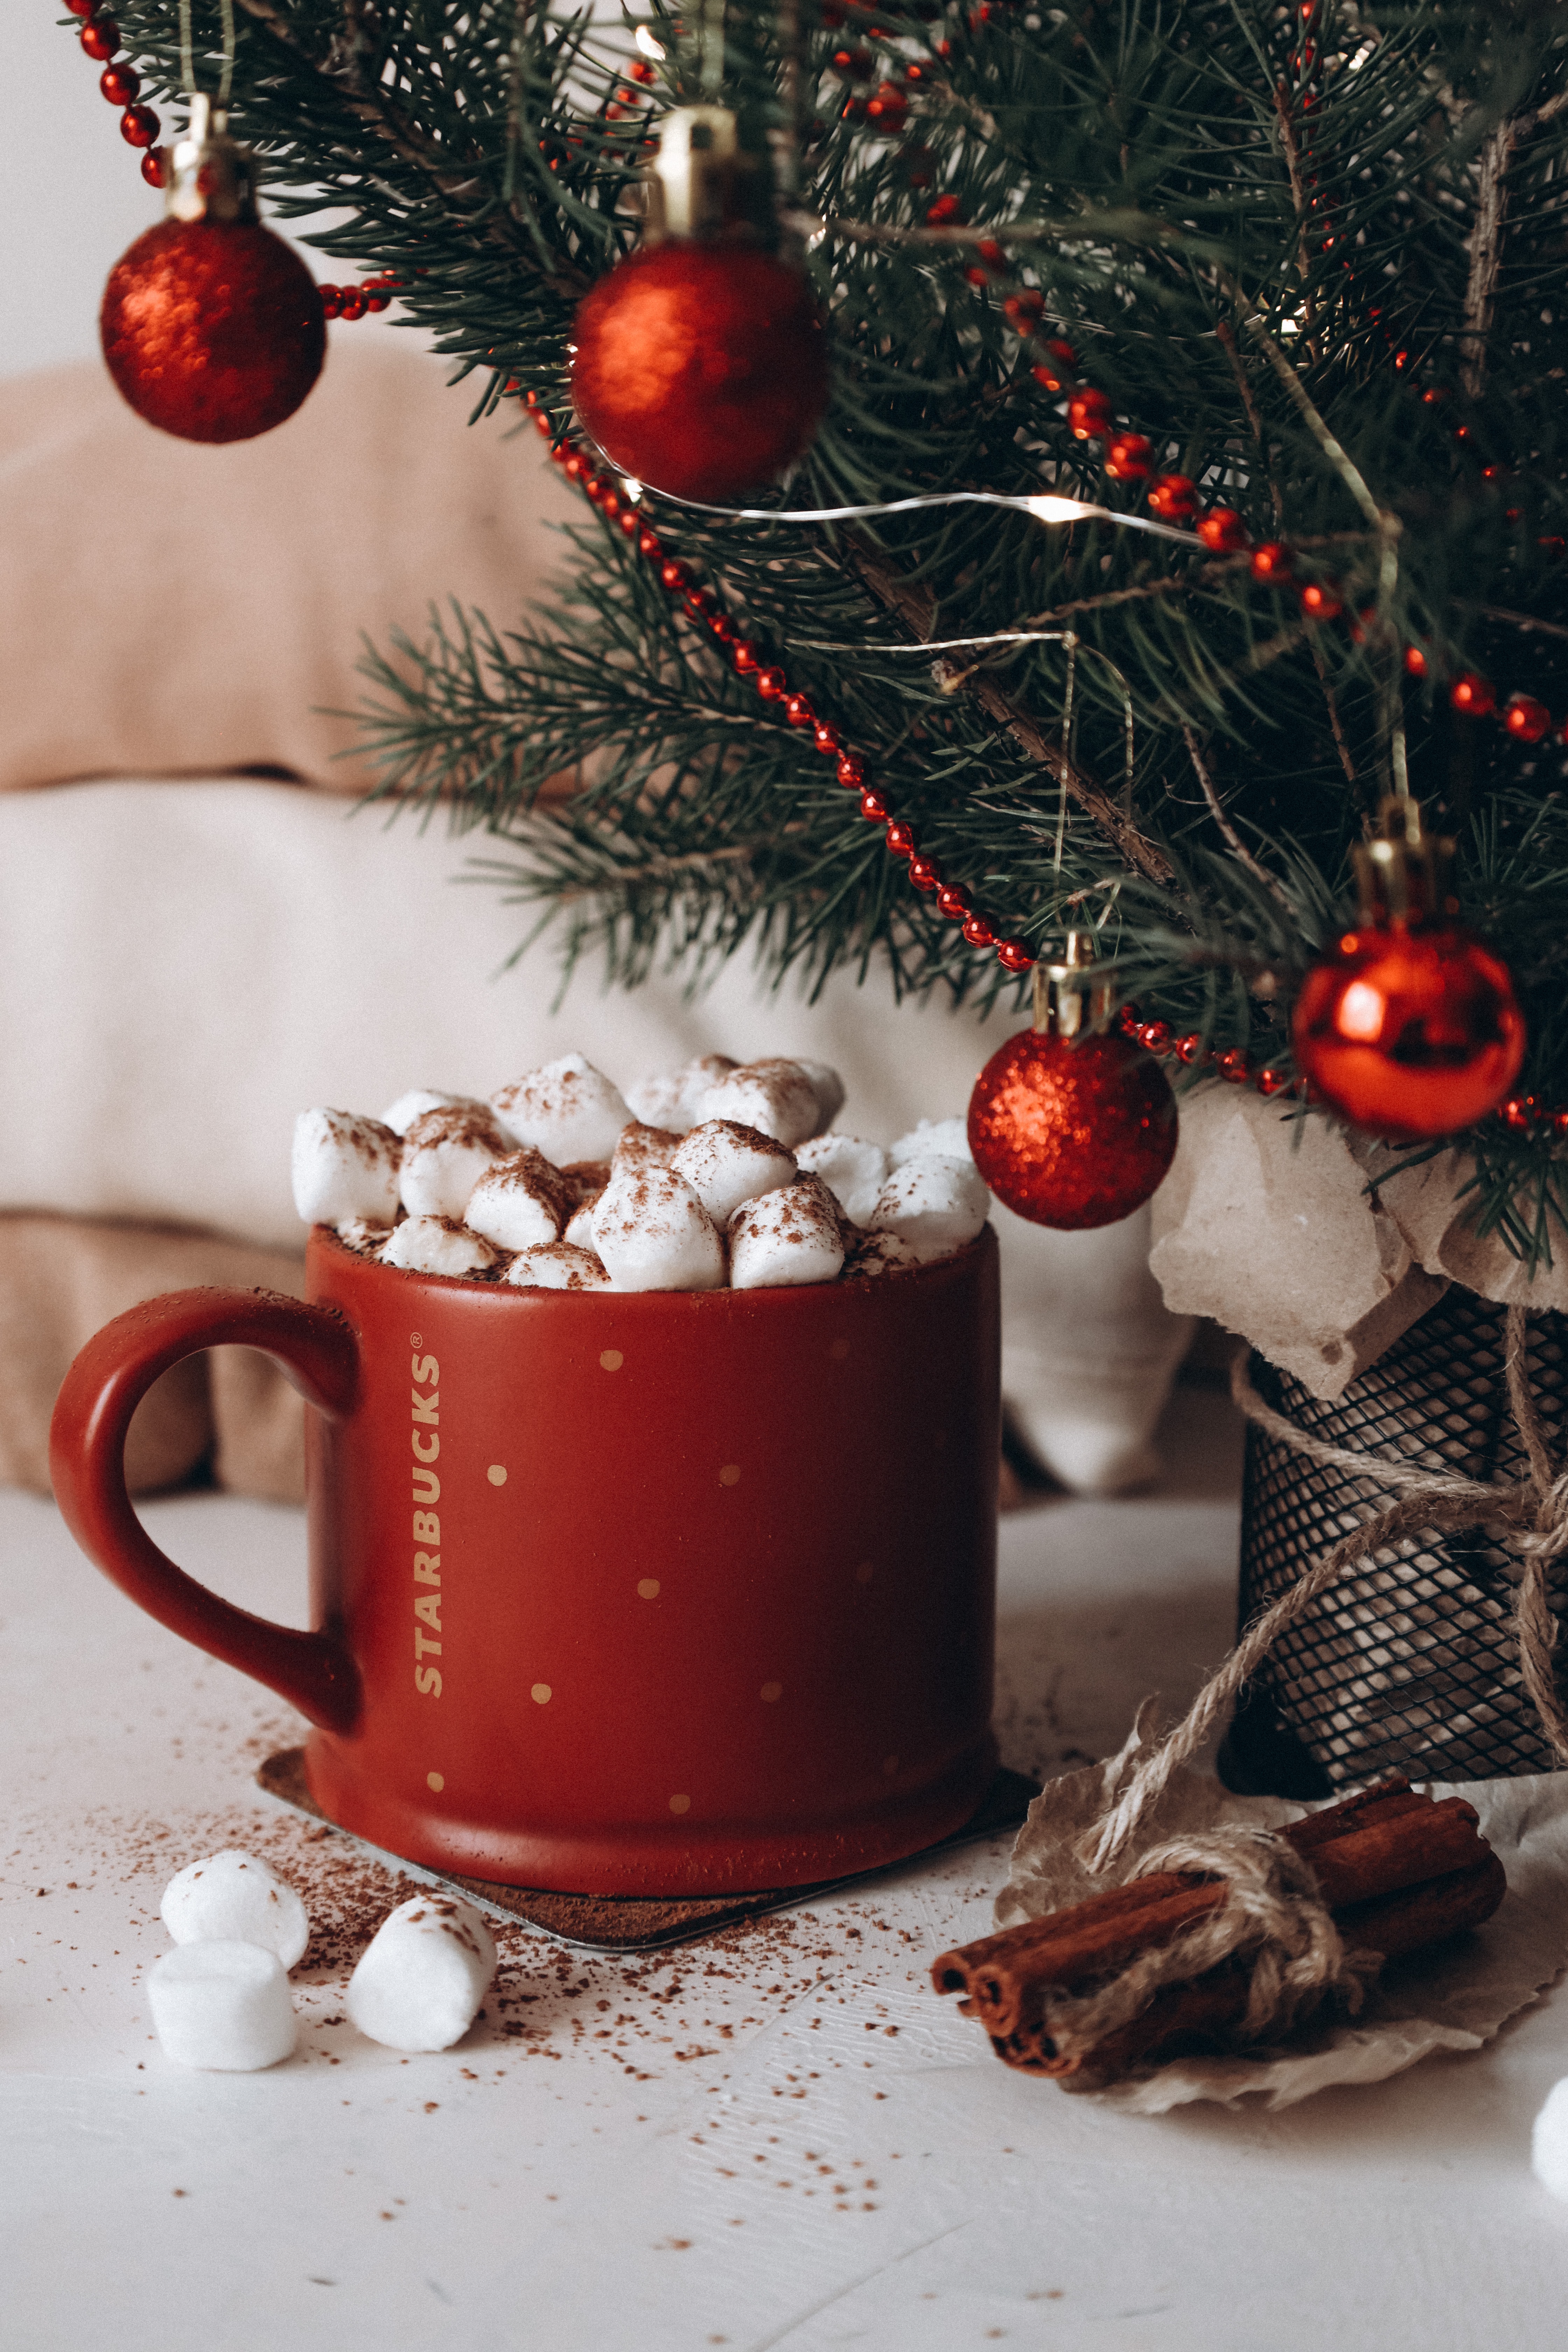 100658 download wallpaper new year, holidays, cup, christmas, christmas tree, mug, marshmallow, zephyr screensavers and pictures for free